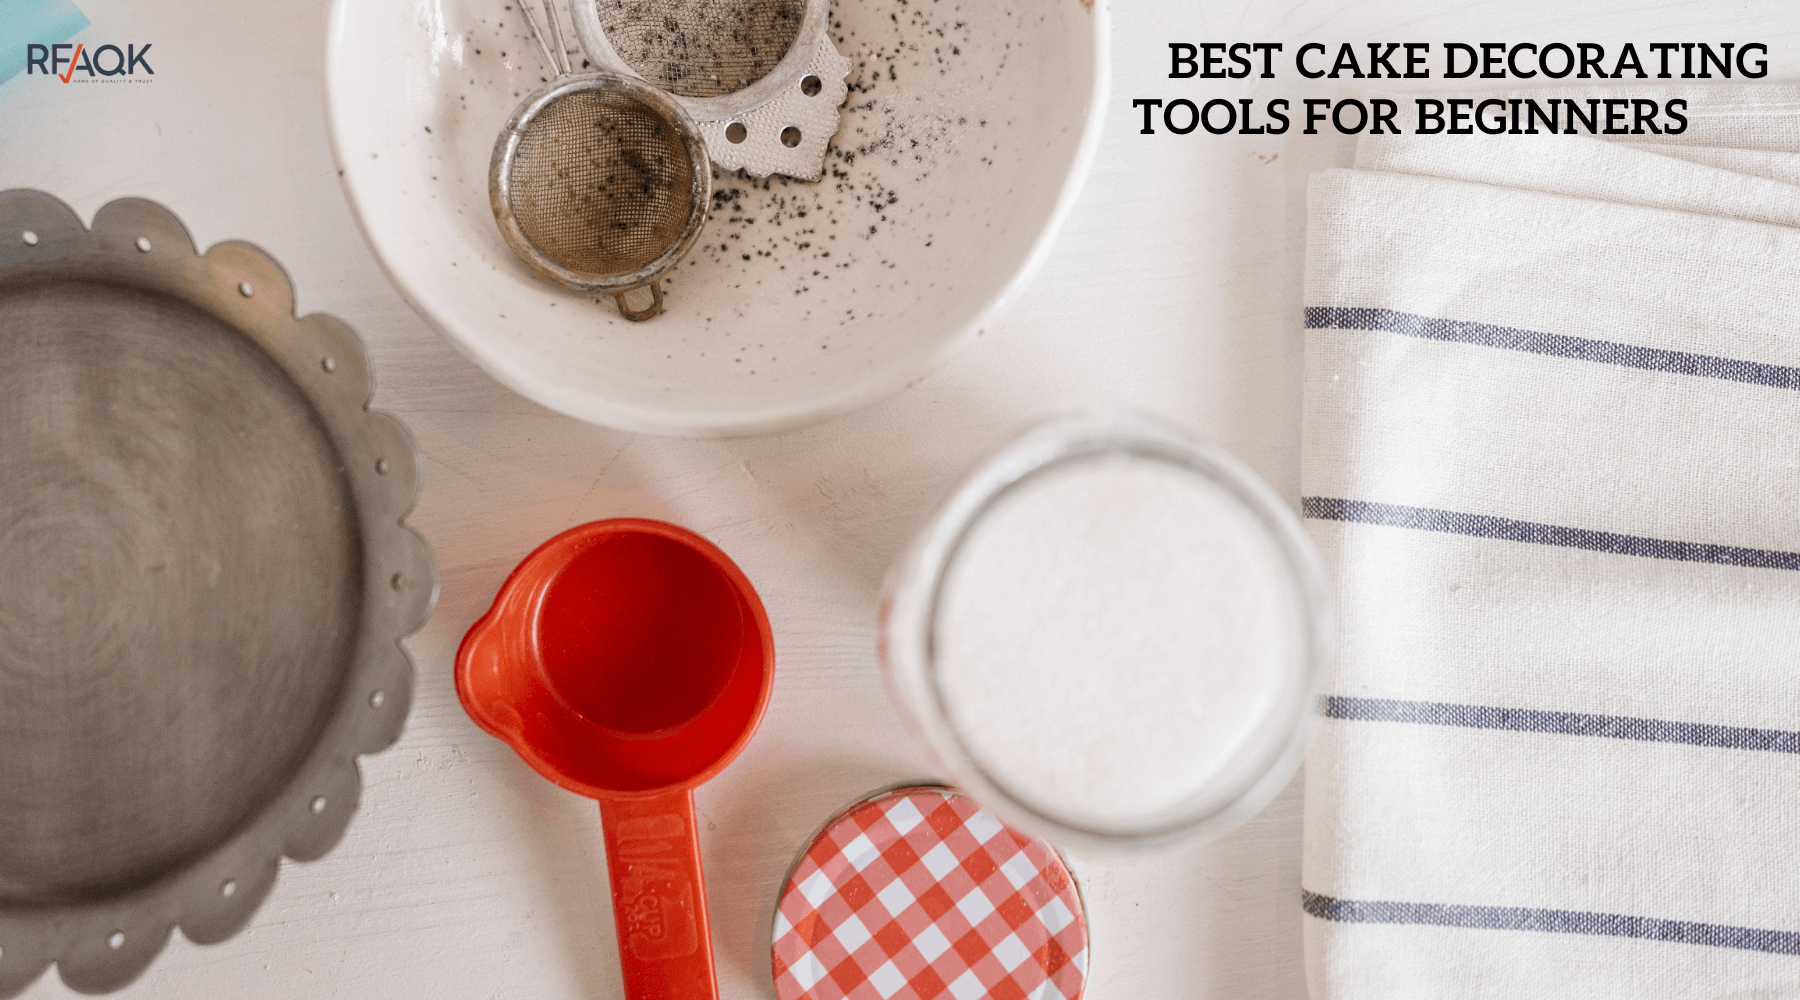 Cake Decorating Tools - The Essential Tools You Need